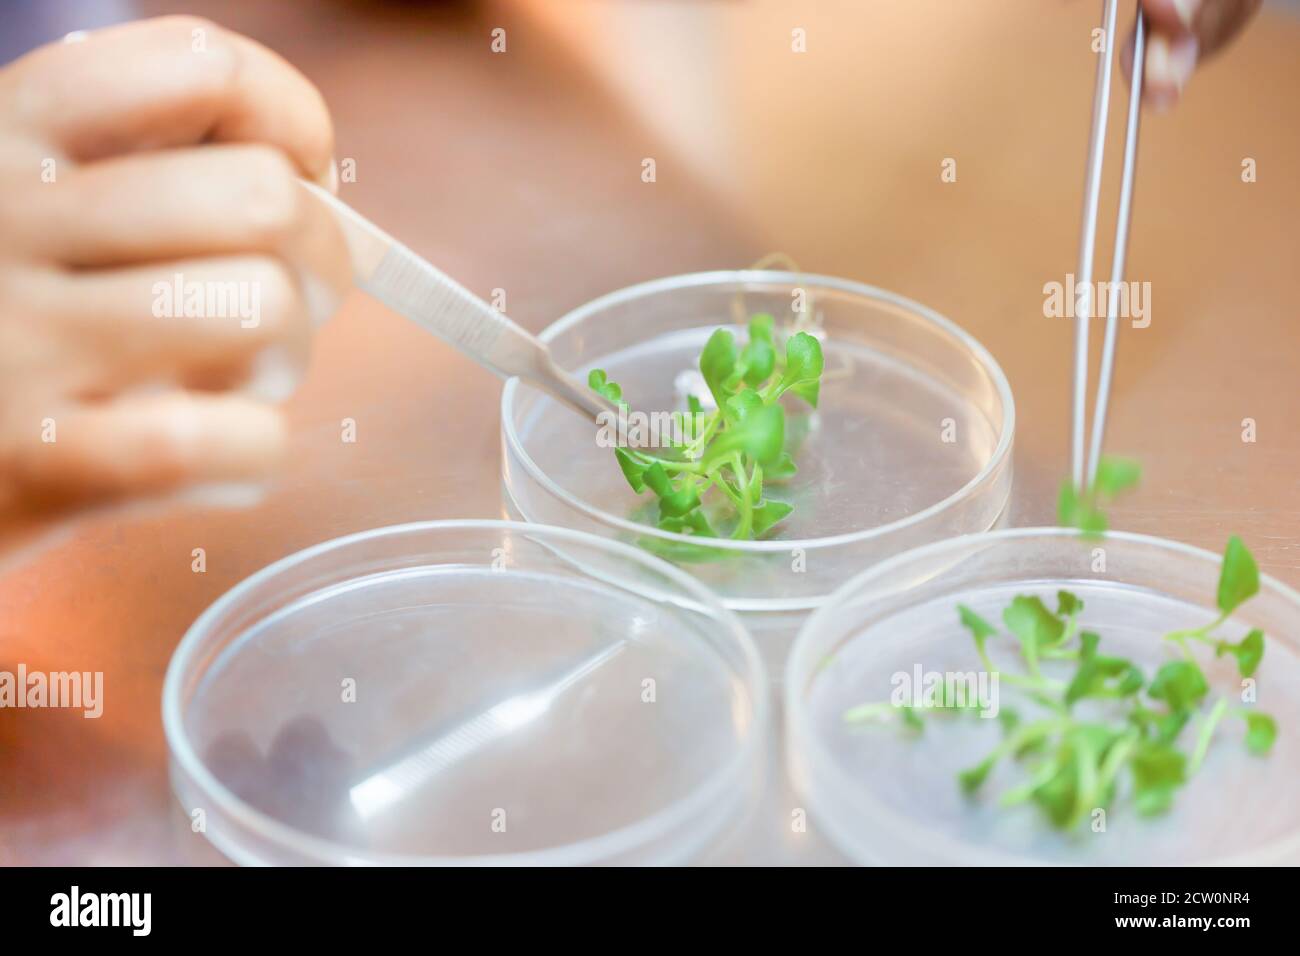 Close-up of female scientist hands cutting plant tissue culture in petri dish, performing laboratory experiments, small plants testing, Asparagus. Stock Photo